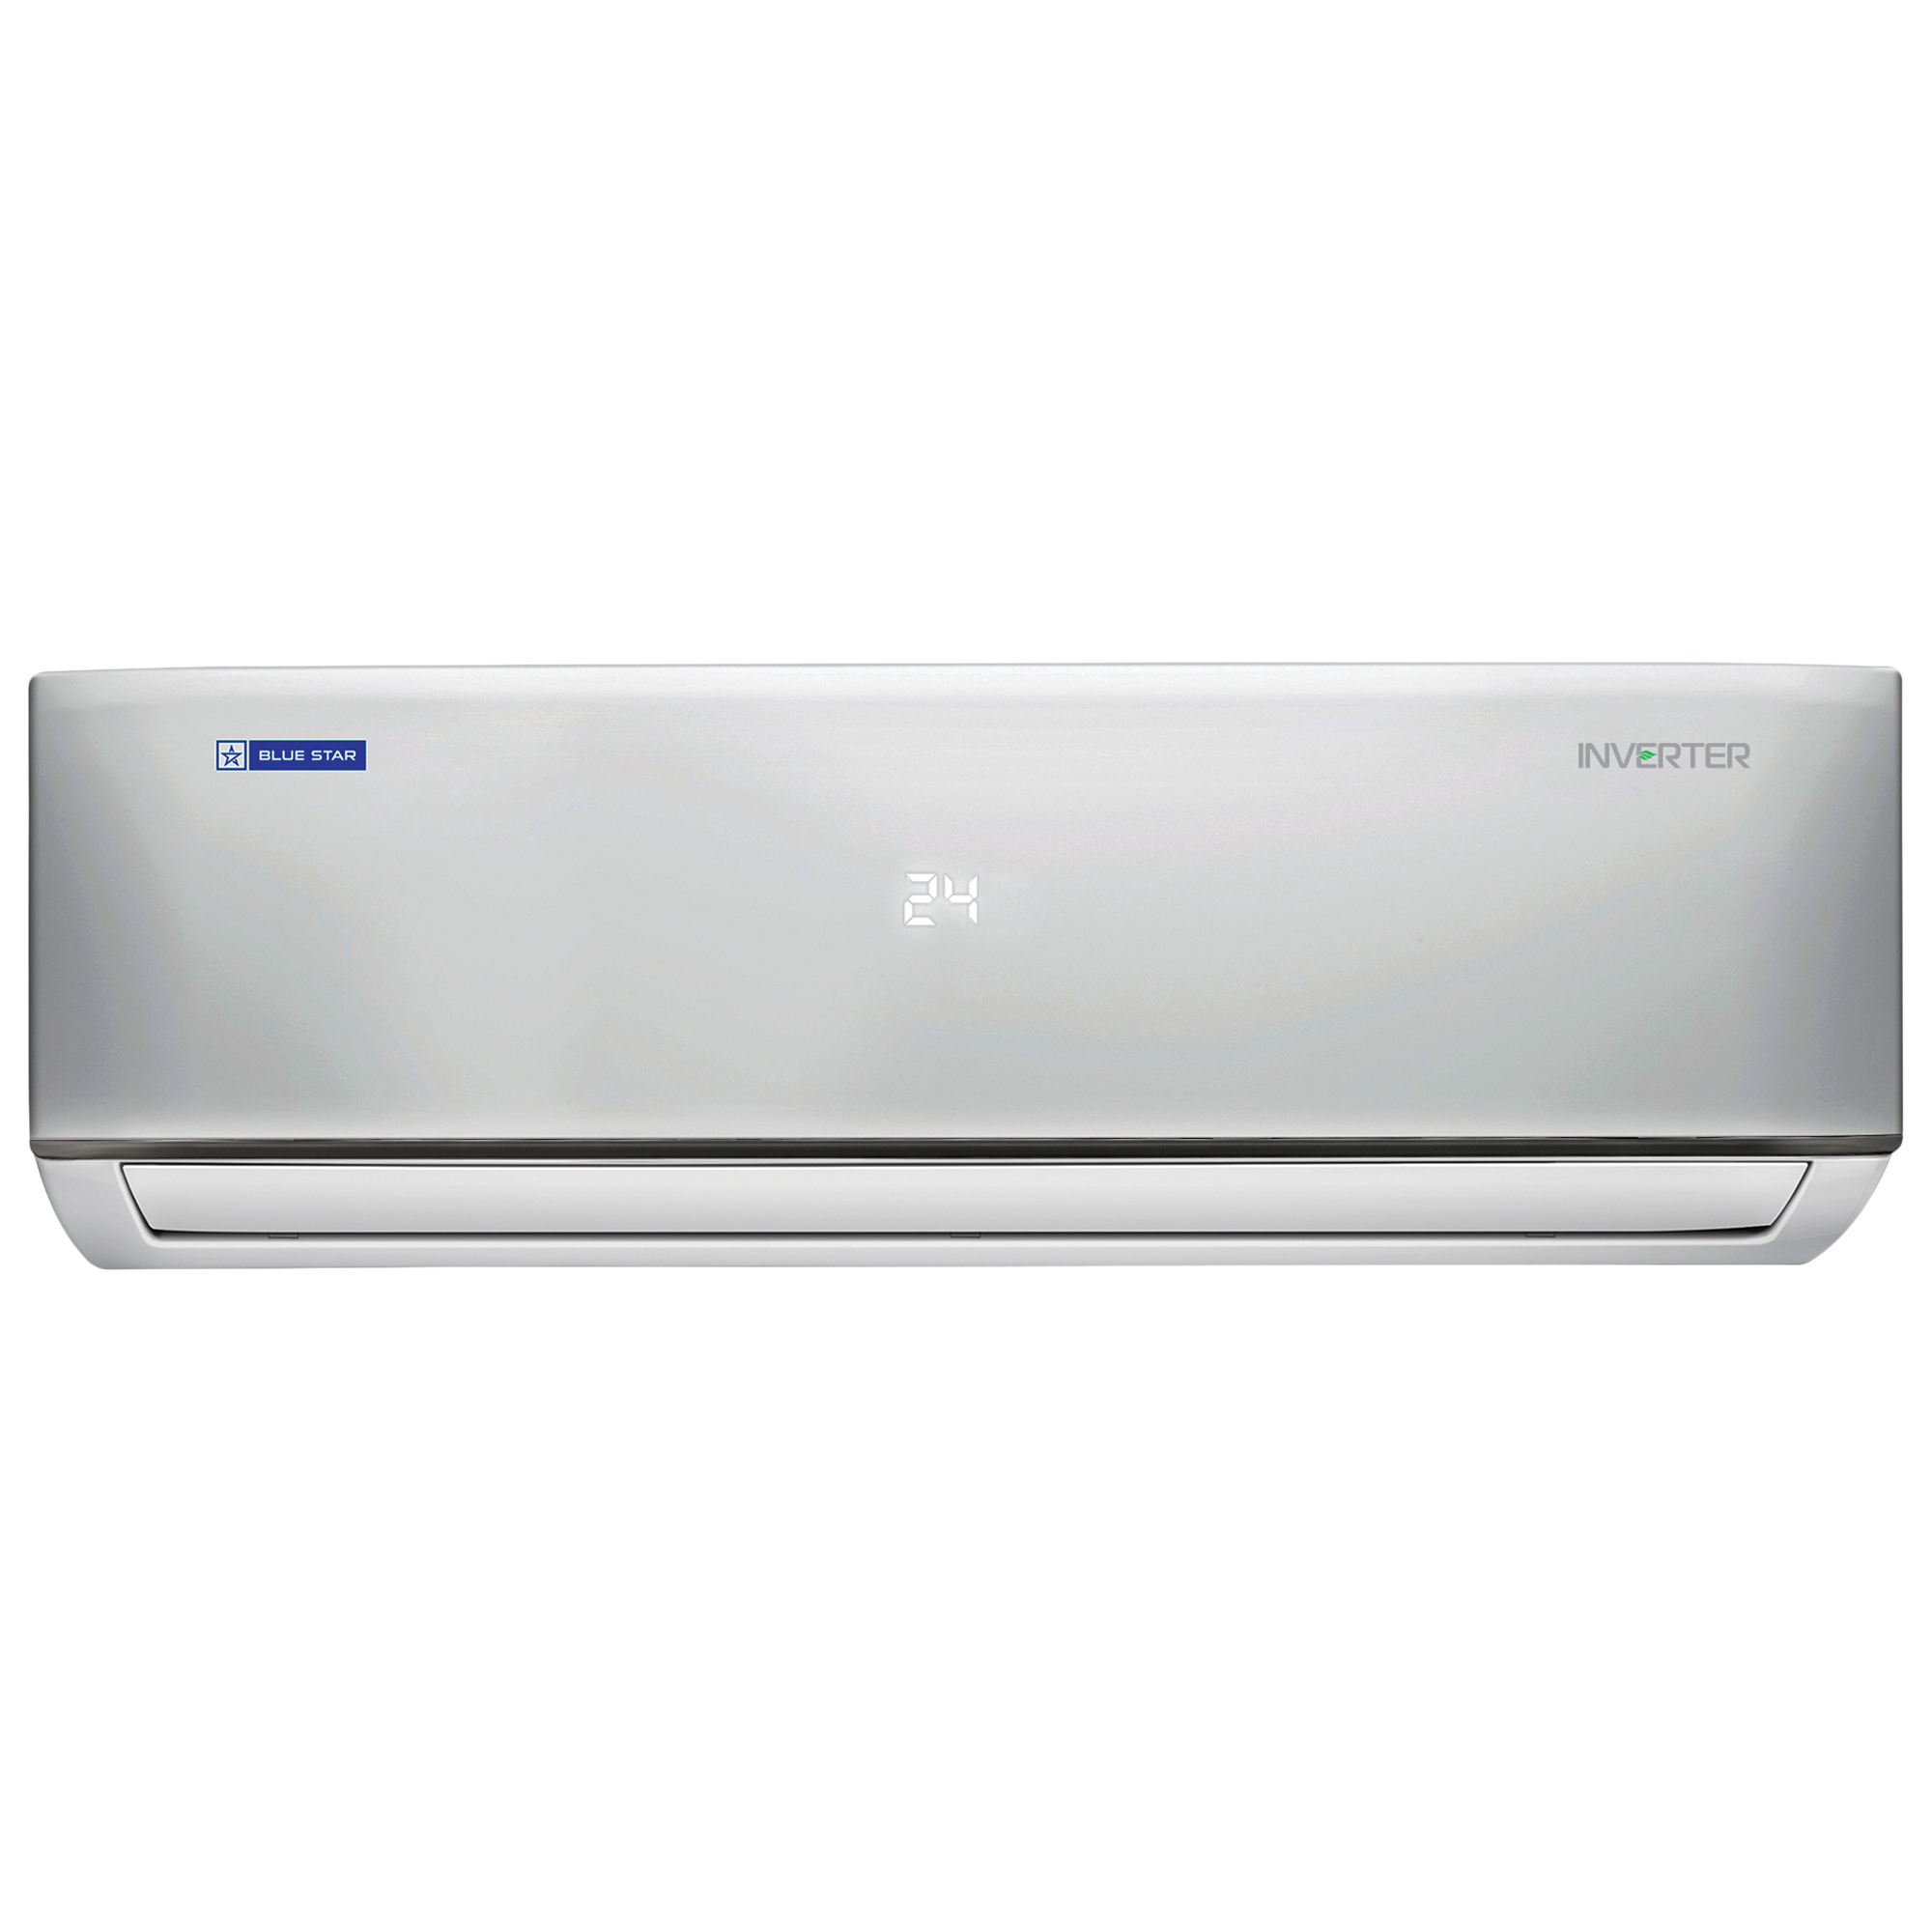 Blue Star 5 in 1 Convertible 1.5 Ton 3 Star Hot & Cold Inverter Split AC with Active Carbon Filter (Copper Condenser, IA318DNUHC)